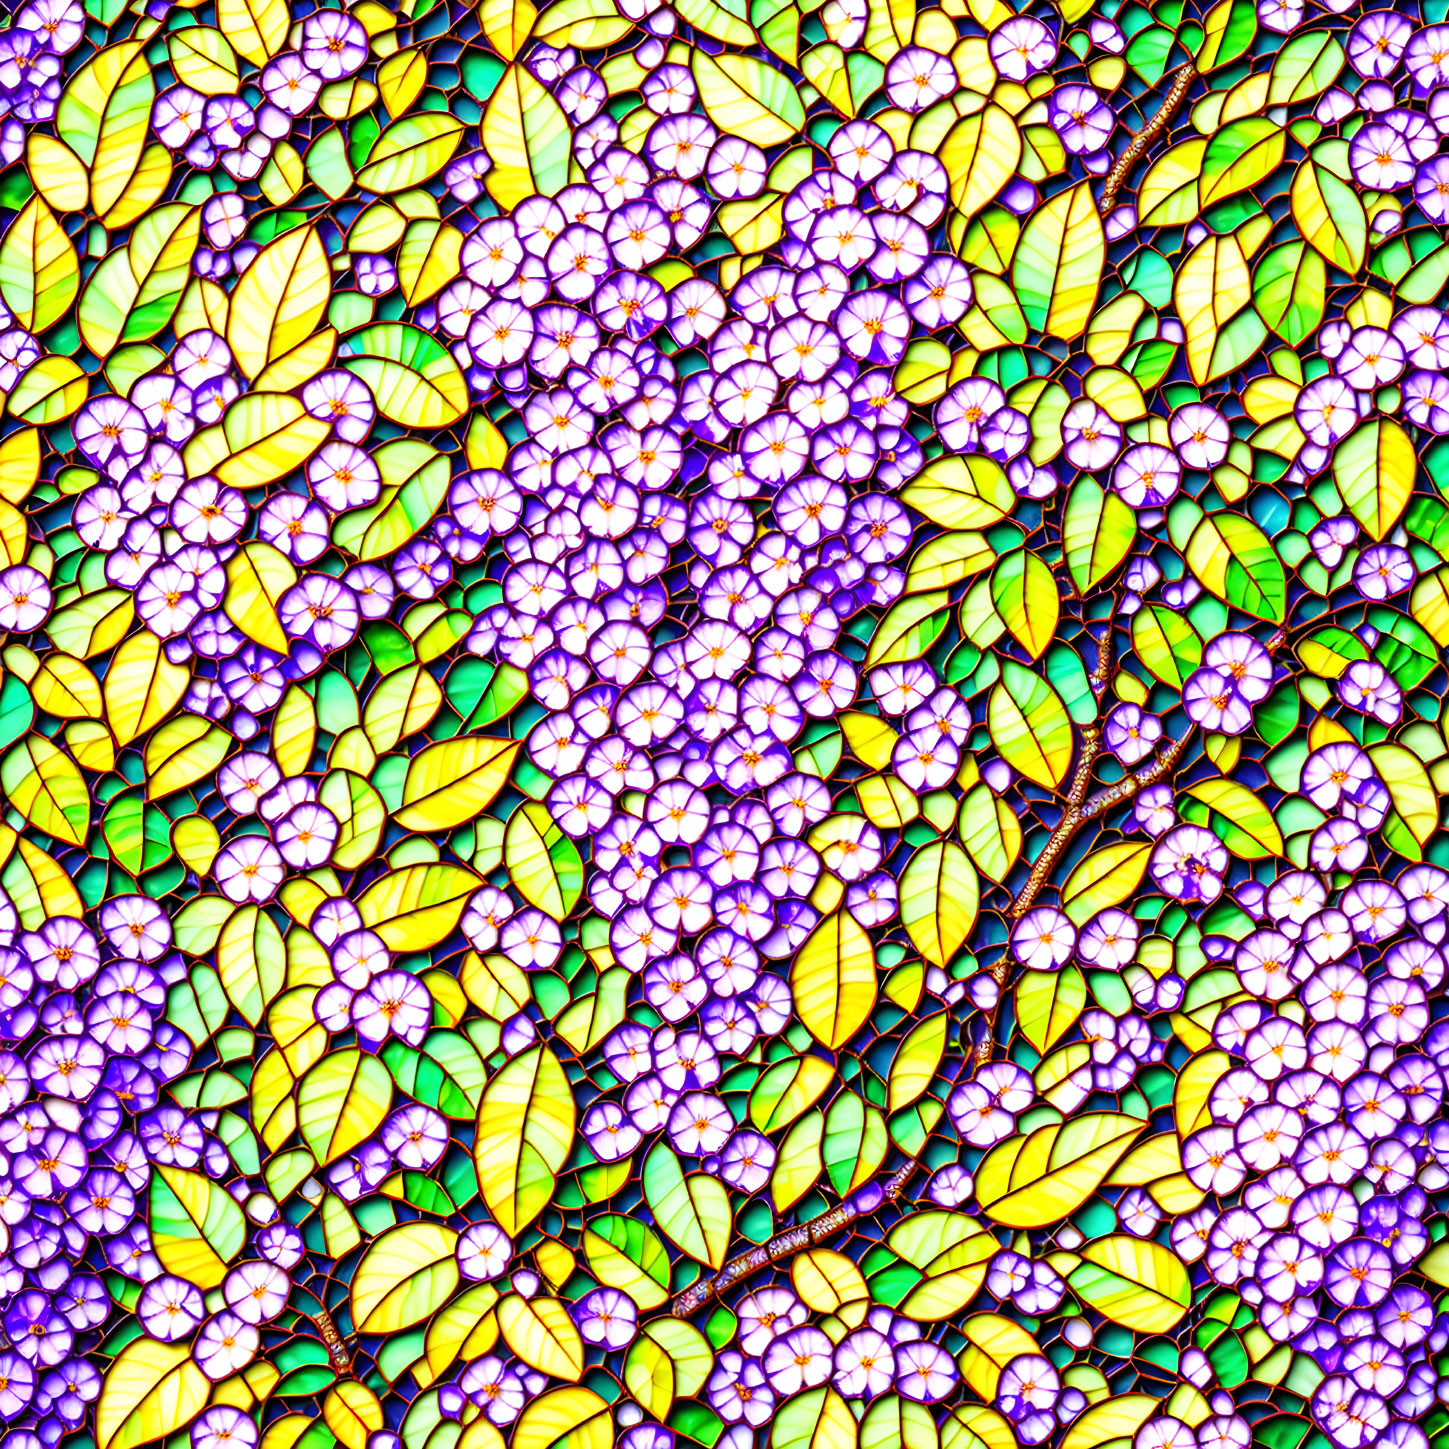 Colorful Floral Pattern with Lilac Flowers and Green-Yellow Leaves